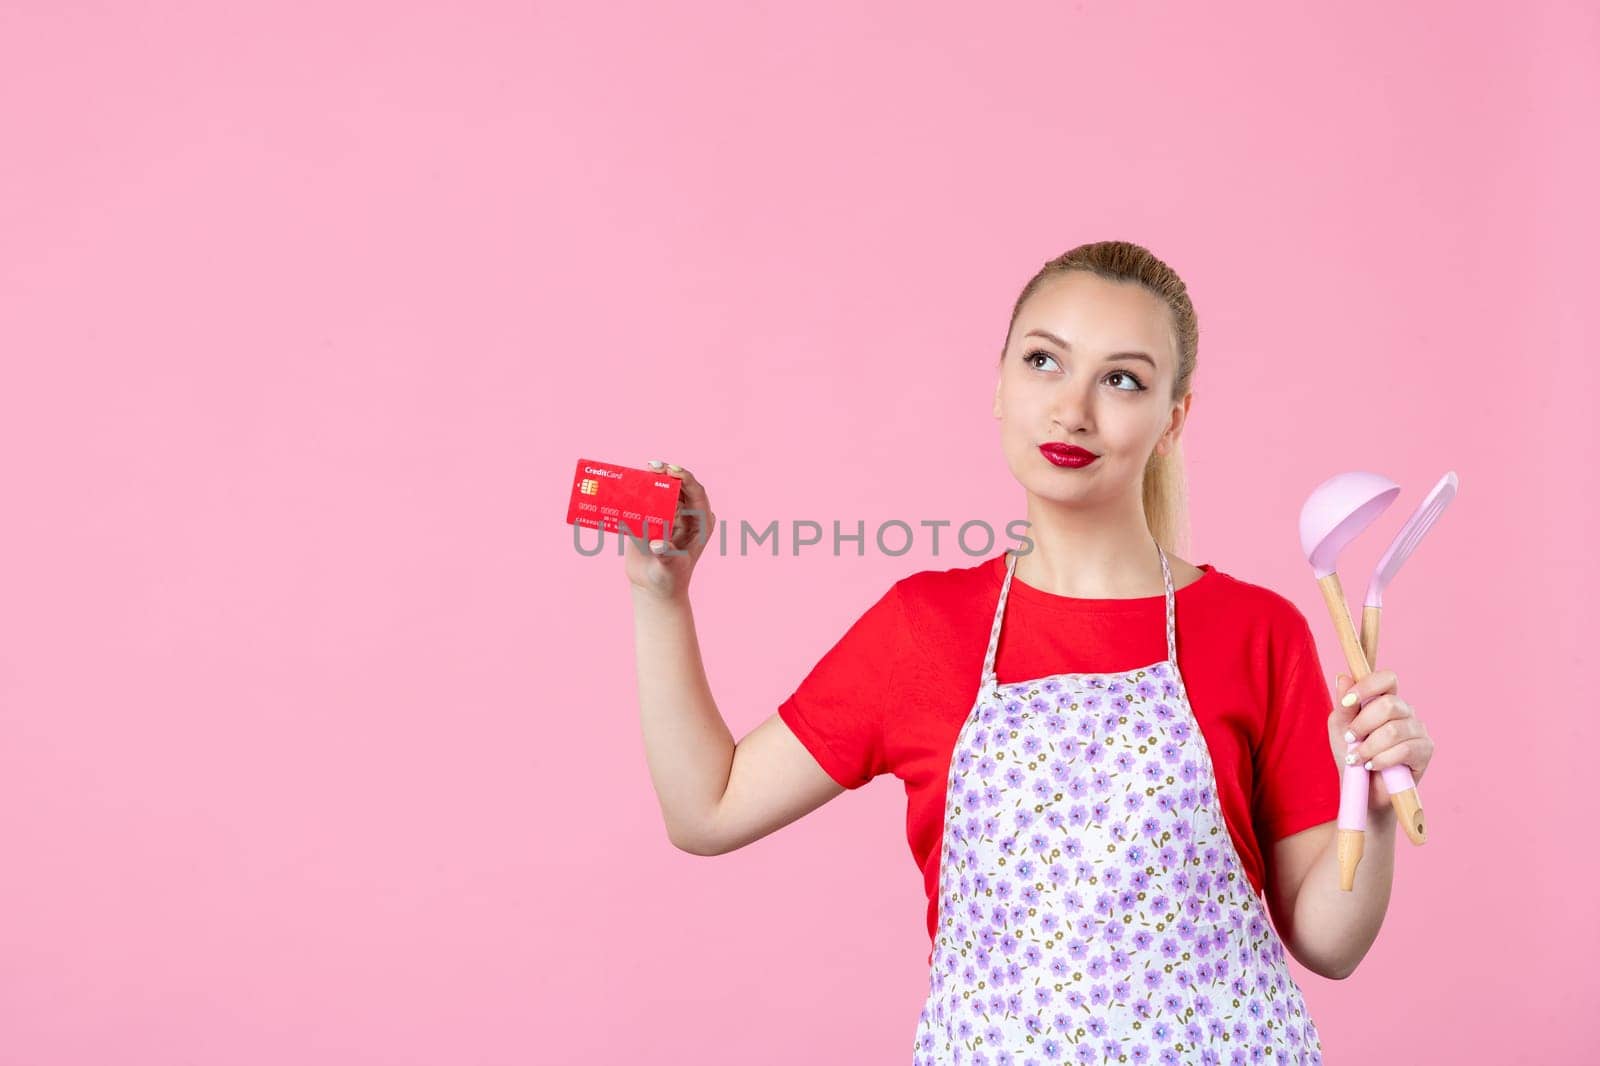 front view young housewife in cape holding spoons and bank card on pink background occupation worker cutlery job wife duty profession money uniform